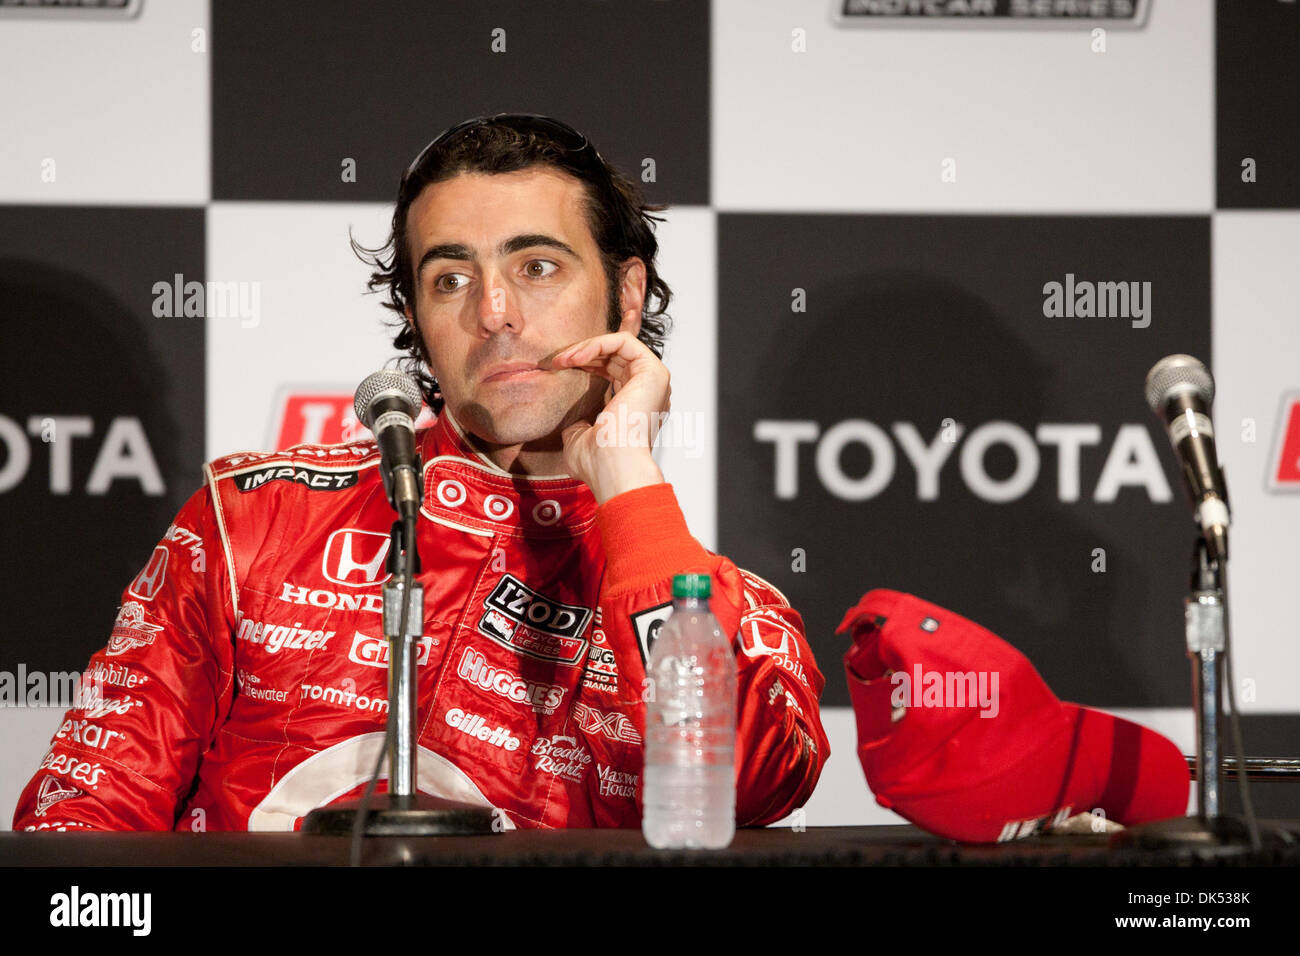 Apr. 17, 2011 - Long Beach, California, U.S - Dario Franchitti driver of the #10 Target Chip Ganassi Racing Dallara Honda answers questions during the post race press confrence of the IndyCar Series 37th annual Toyota Grand Prix of Long Beach. (Credit Image: © Brandon Parry/Southcreek Global/ZUMAPRESS.com) Stock Photo